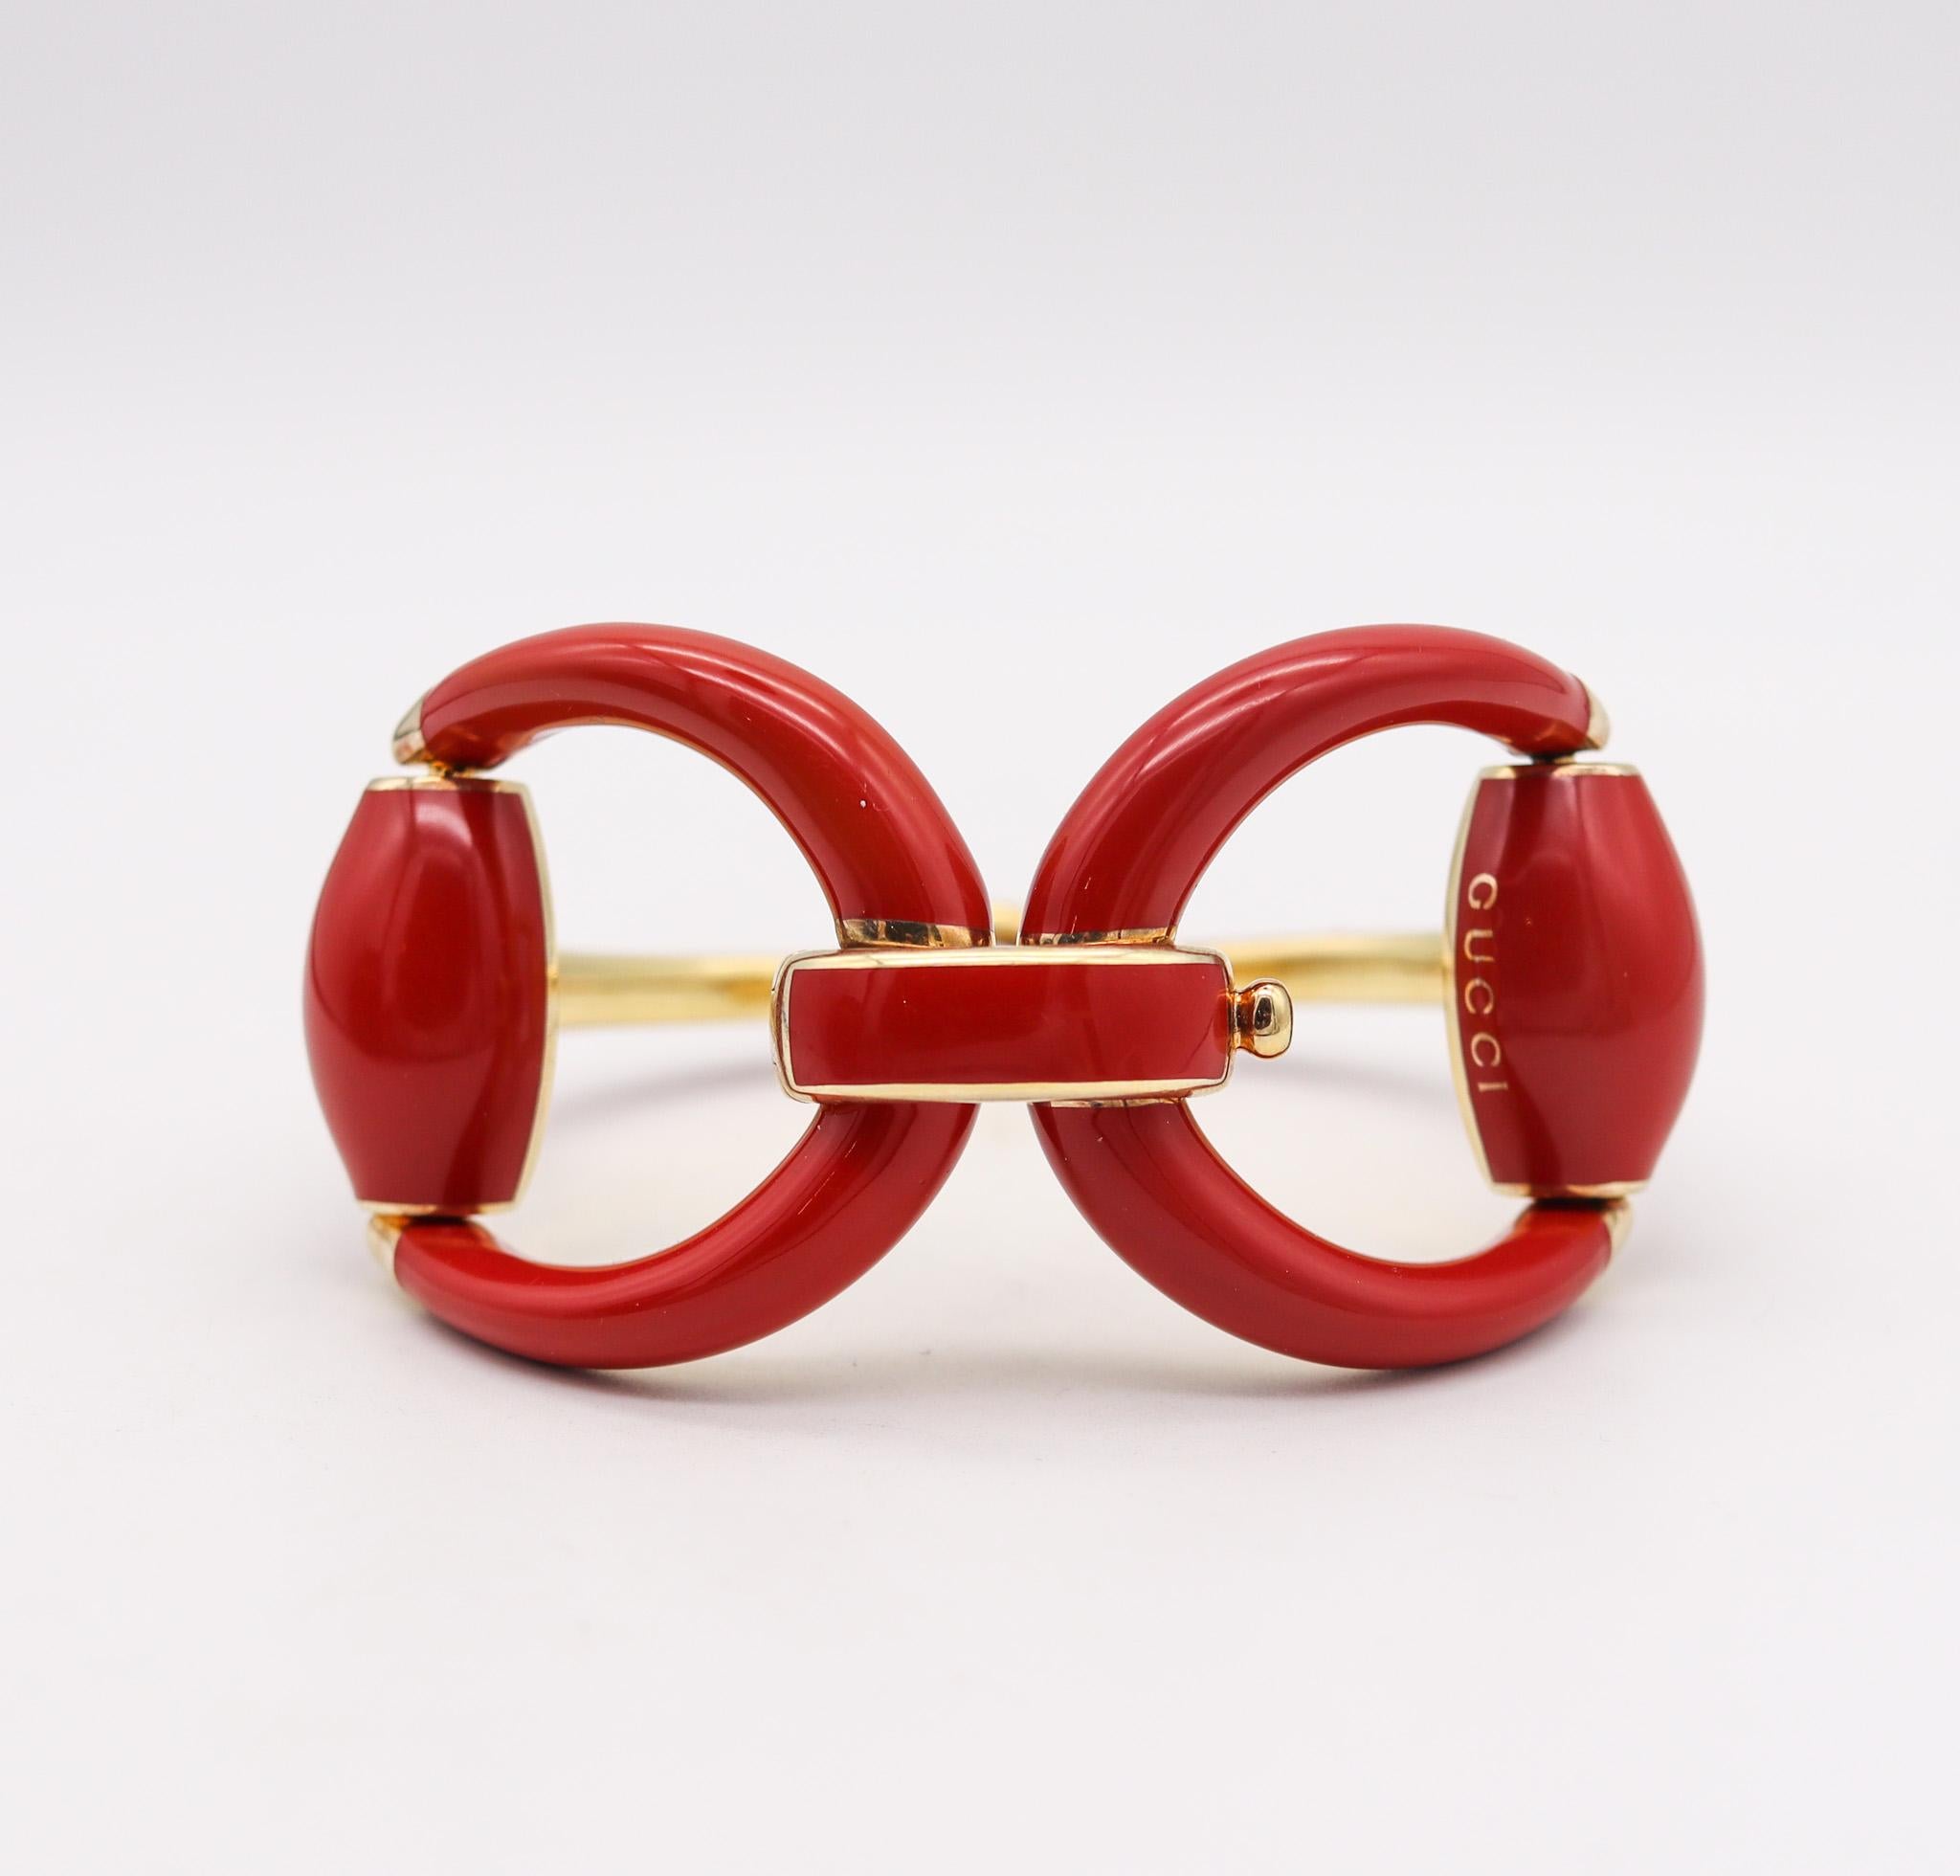 Double horsebit bracelet designed by Gucci.

An iconic vintage double horsebit bracelet, created in Milano Italy by the fashion and jewelry house of Gucci, back in the 1990. This bracelet is made up by 4 flexible parts, crafted in solid .925/.999